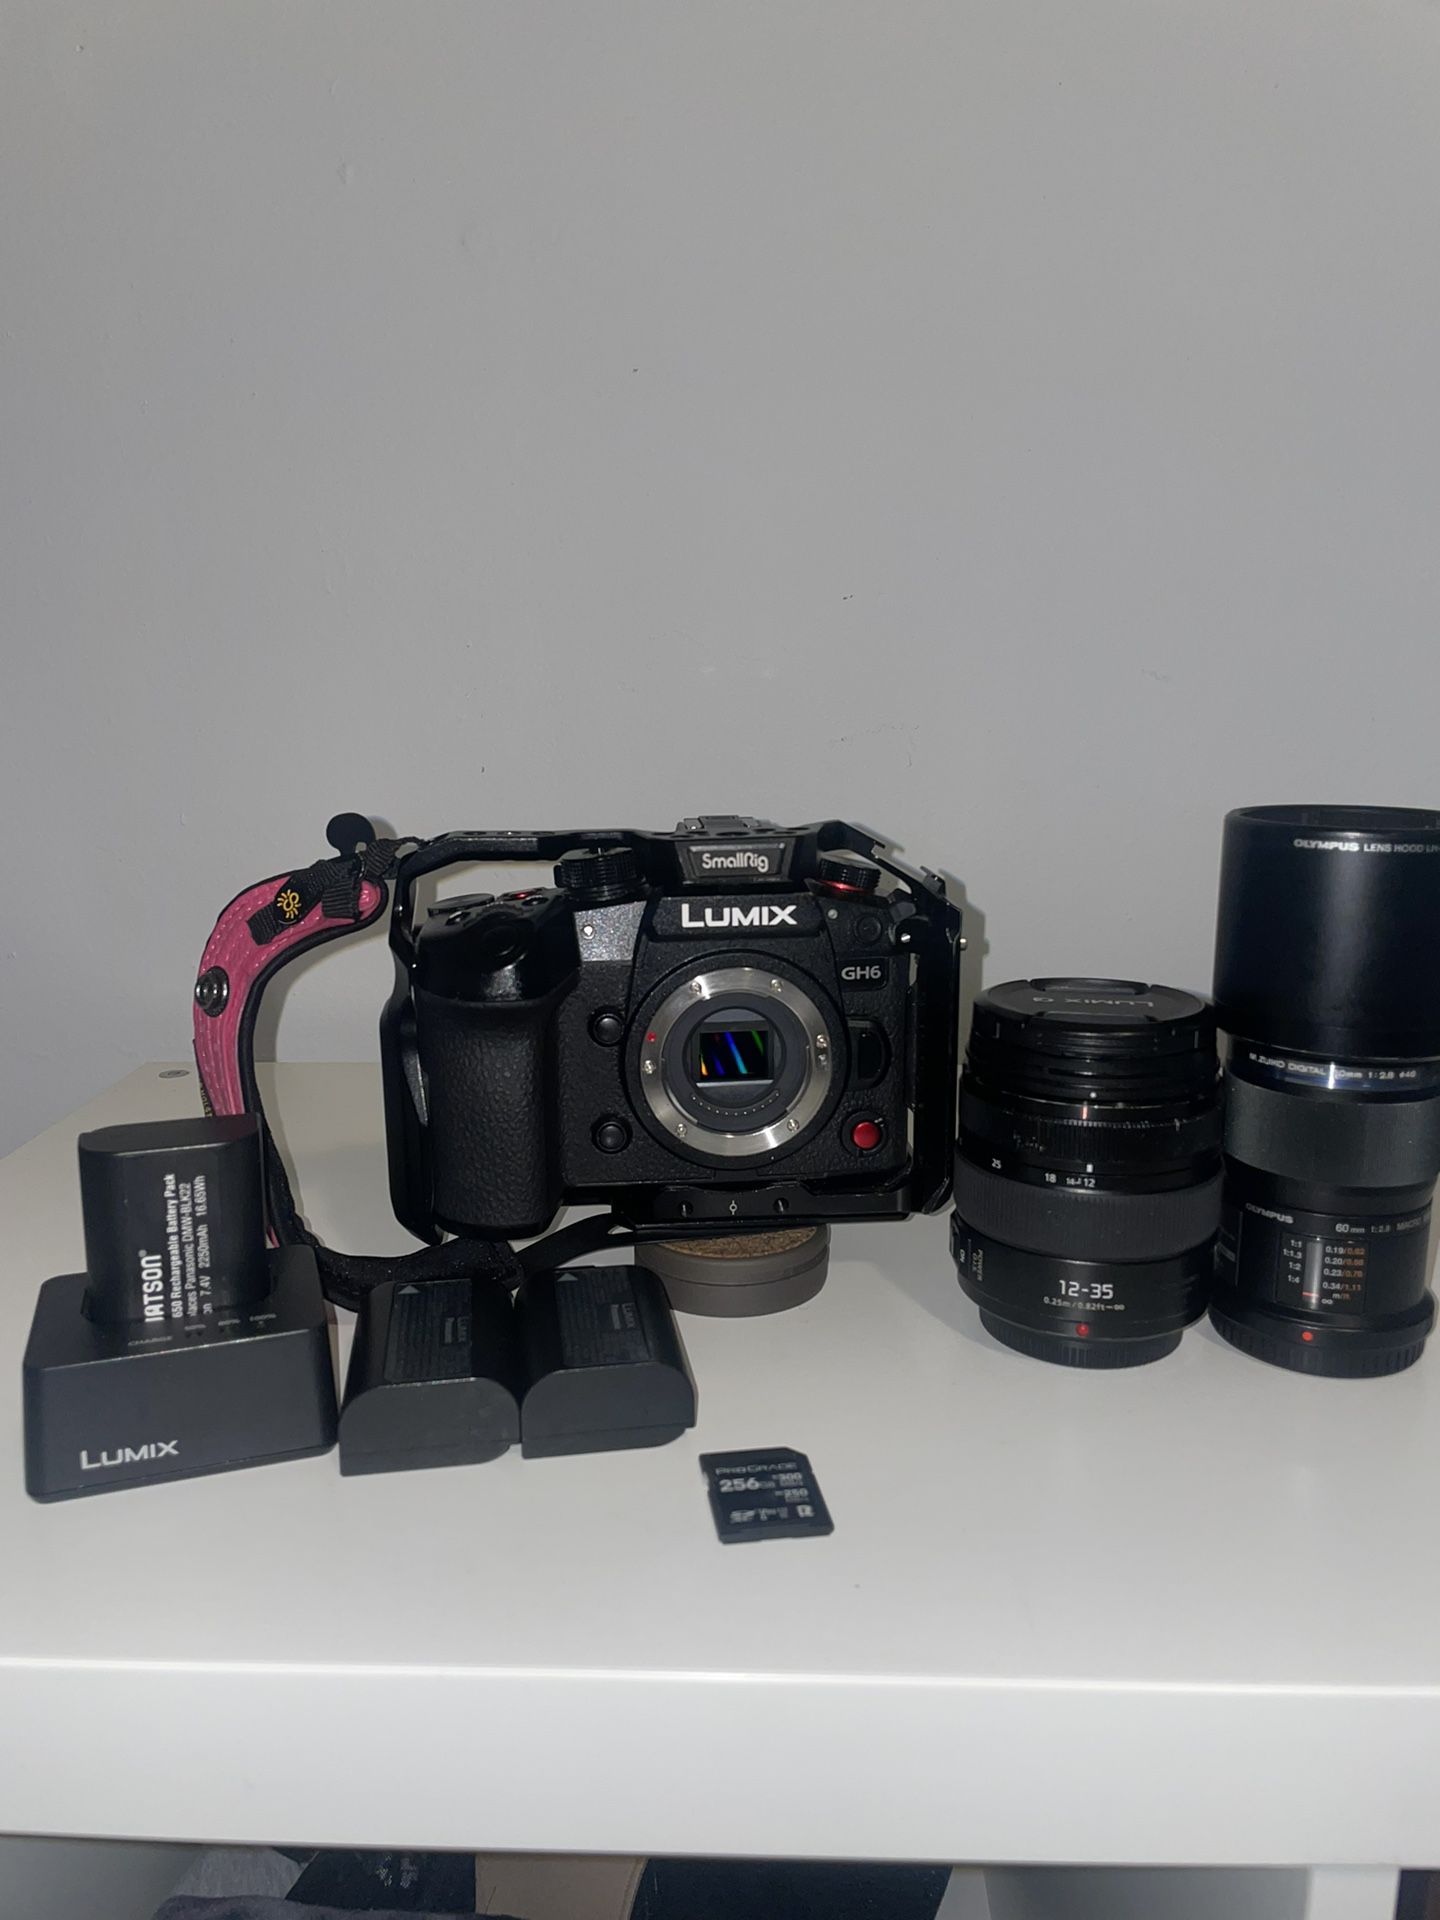 Panasonic Lumix GH6 For Sale! Lens, Batteries, Charger And Gimbal Included!